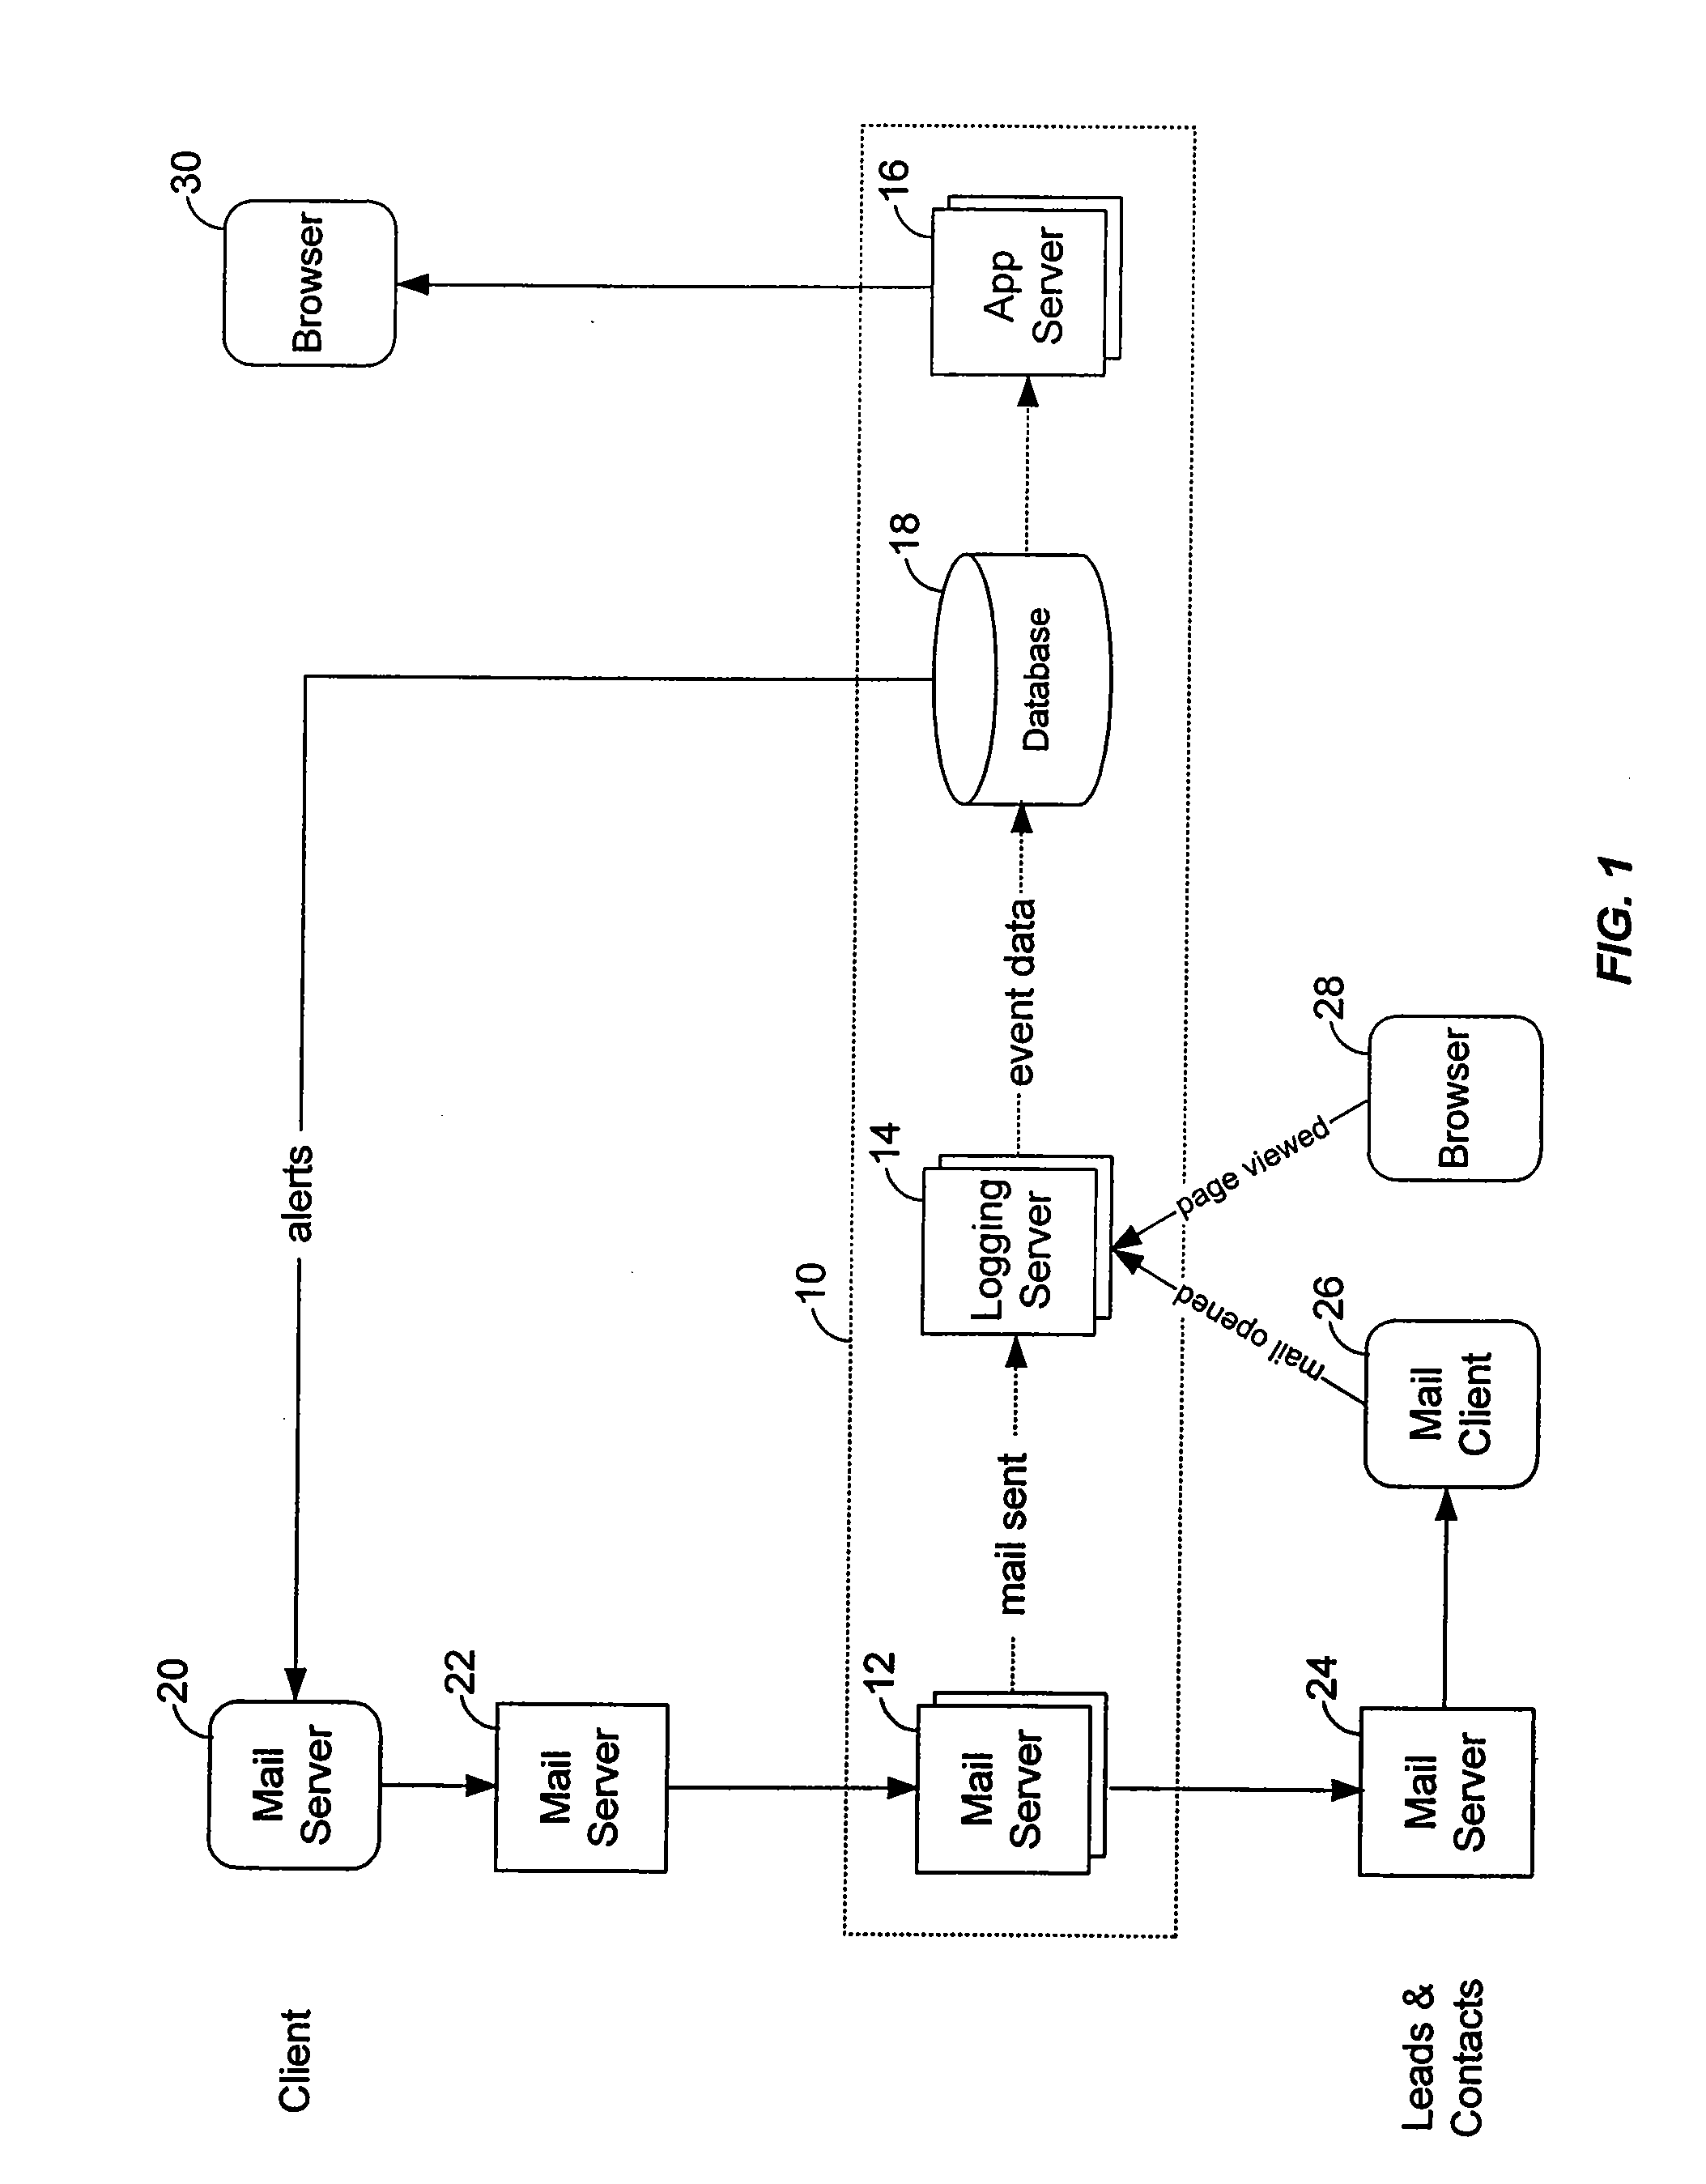 Method and system for monitoring email and website behavior of an email recipient